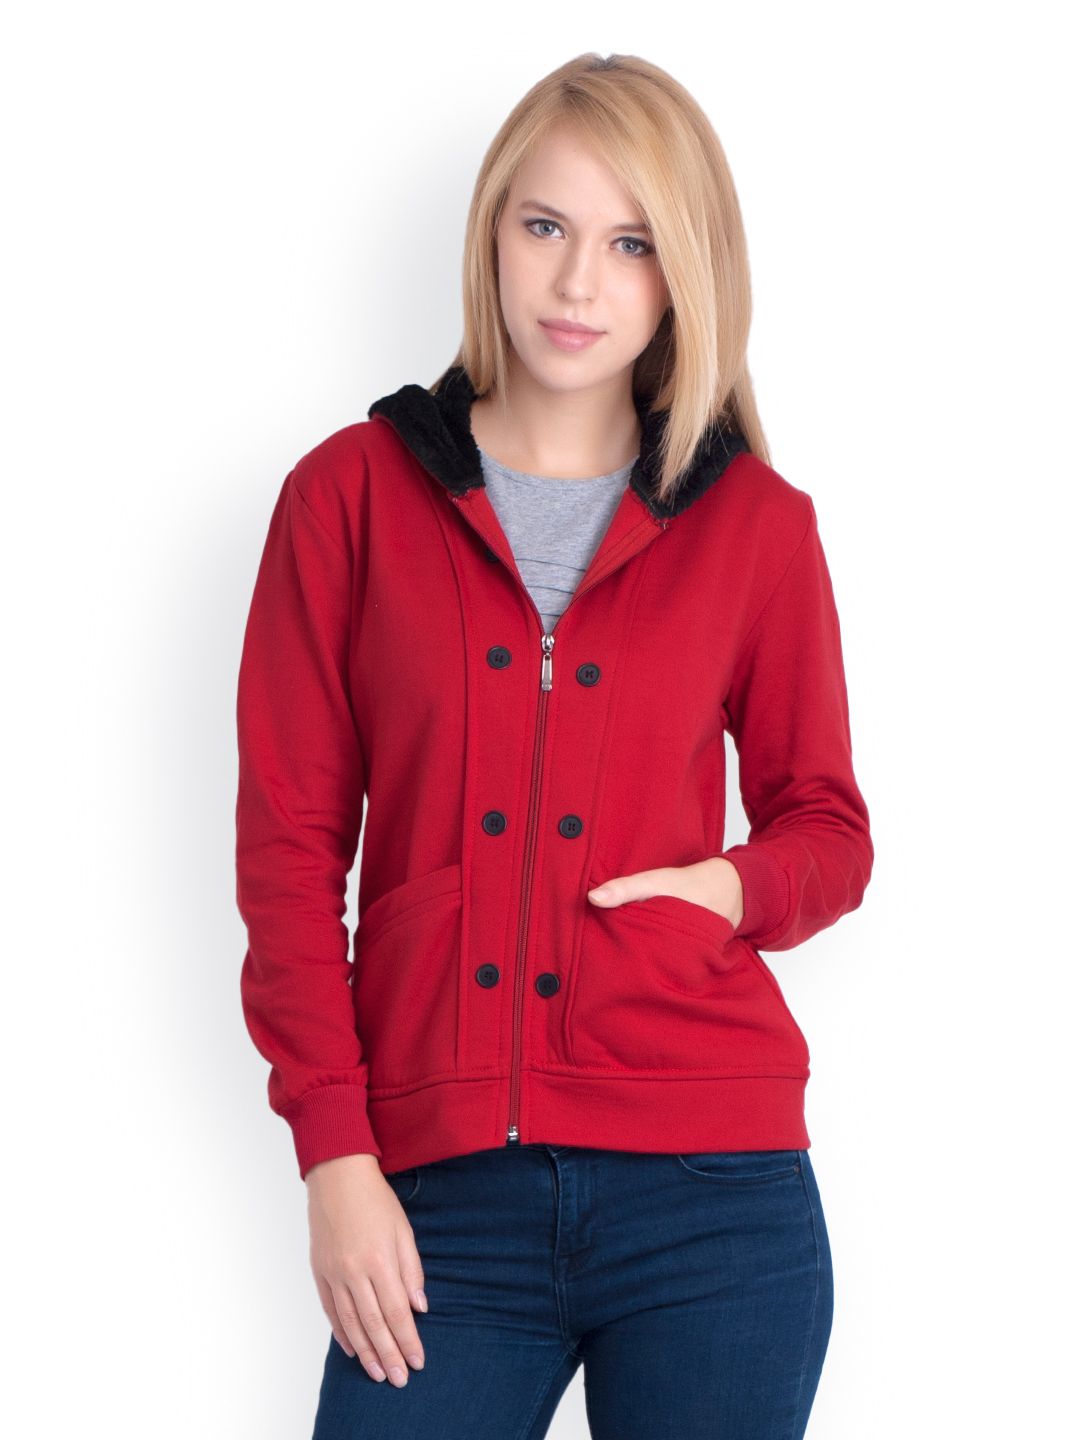 Belle Fille Red Polyester Fleece Hooded Sweatshirt Price in India